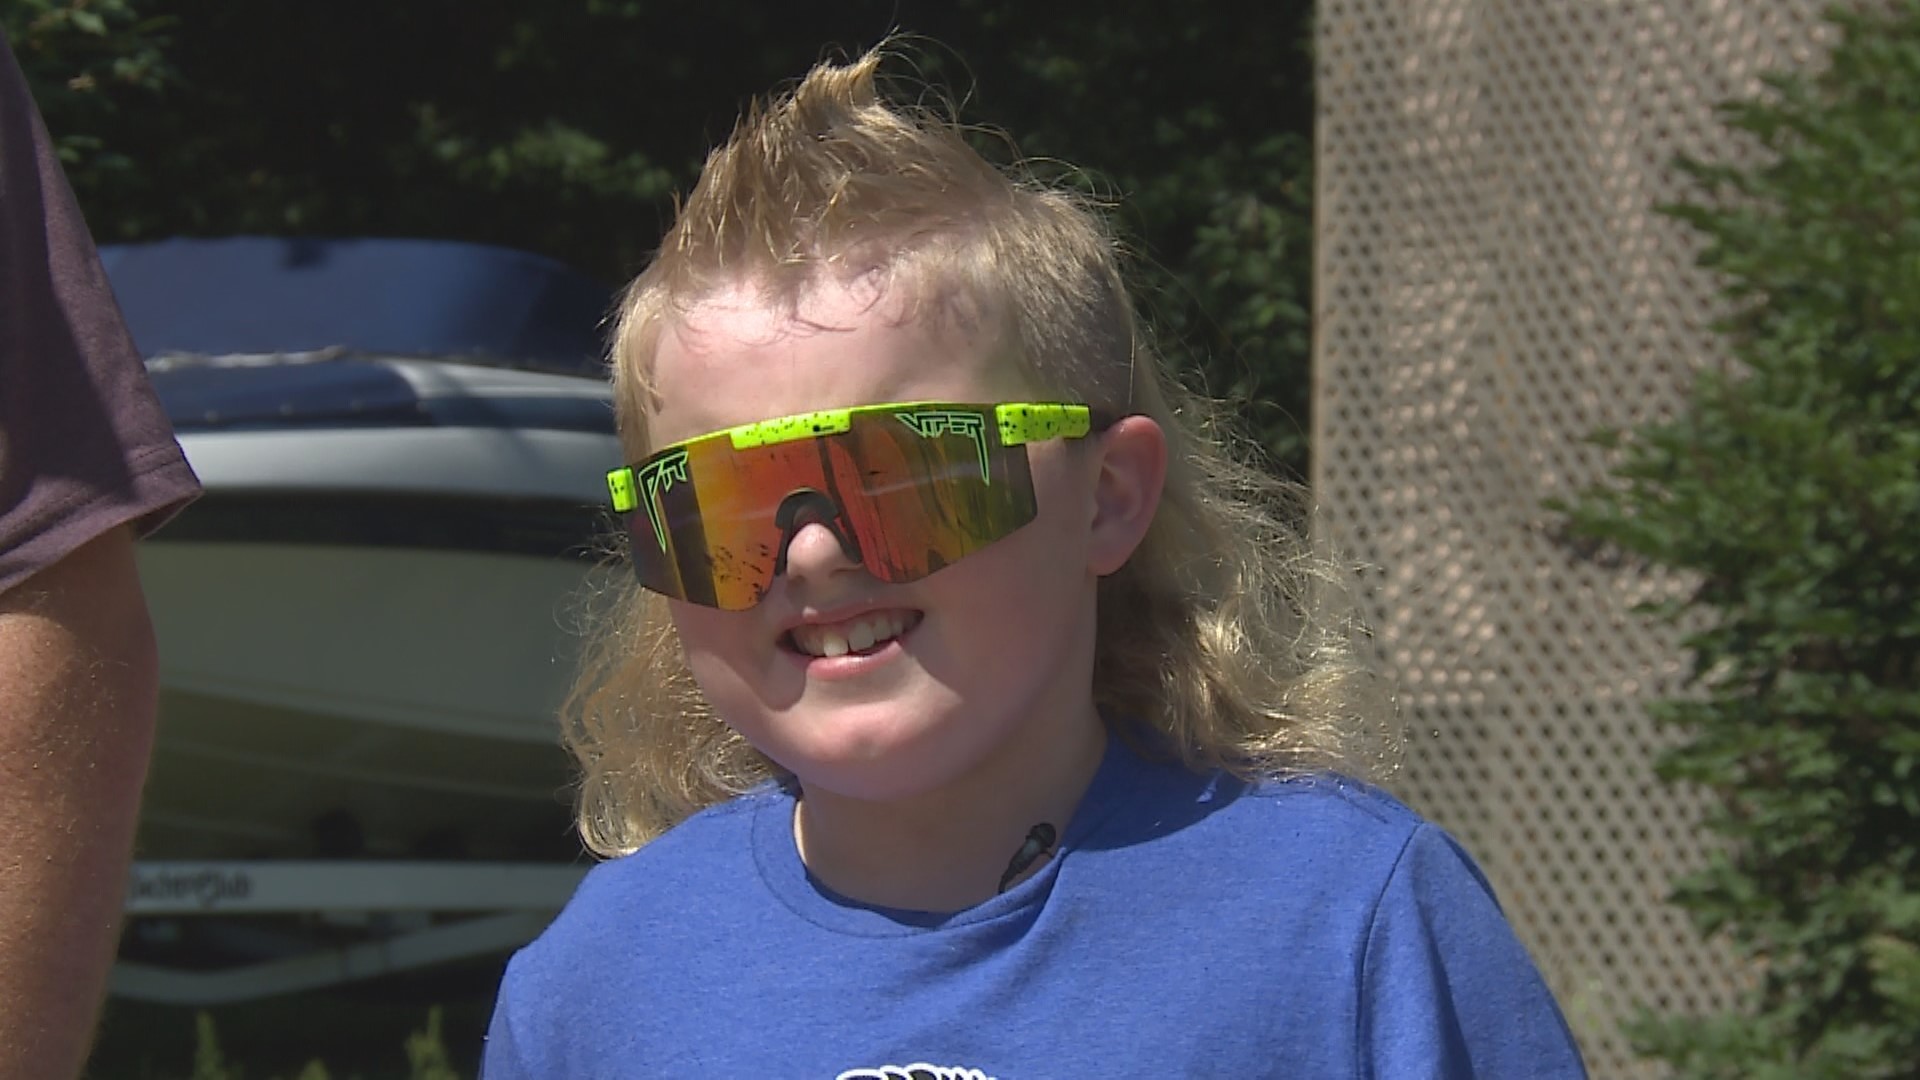 8-year-old Emmitt Bailey is scheduled to make an appearance at an upcoming Milwaukee Brewers game and an NHL preseason game.